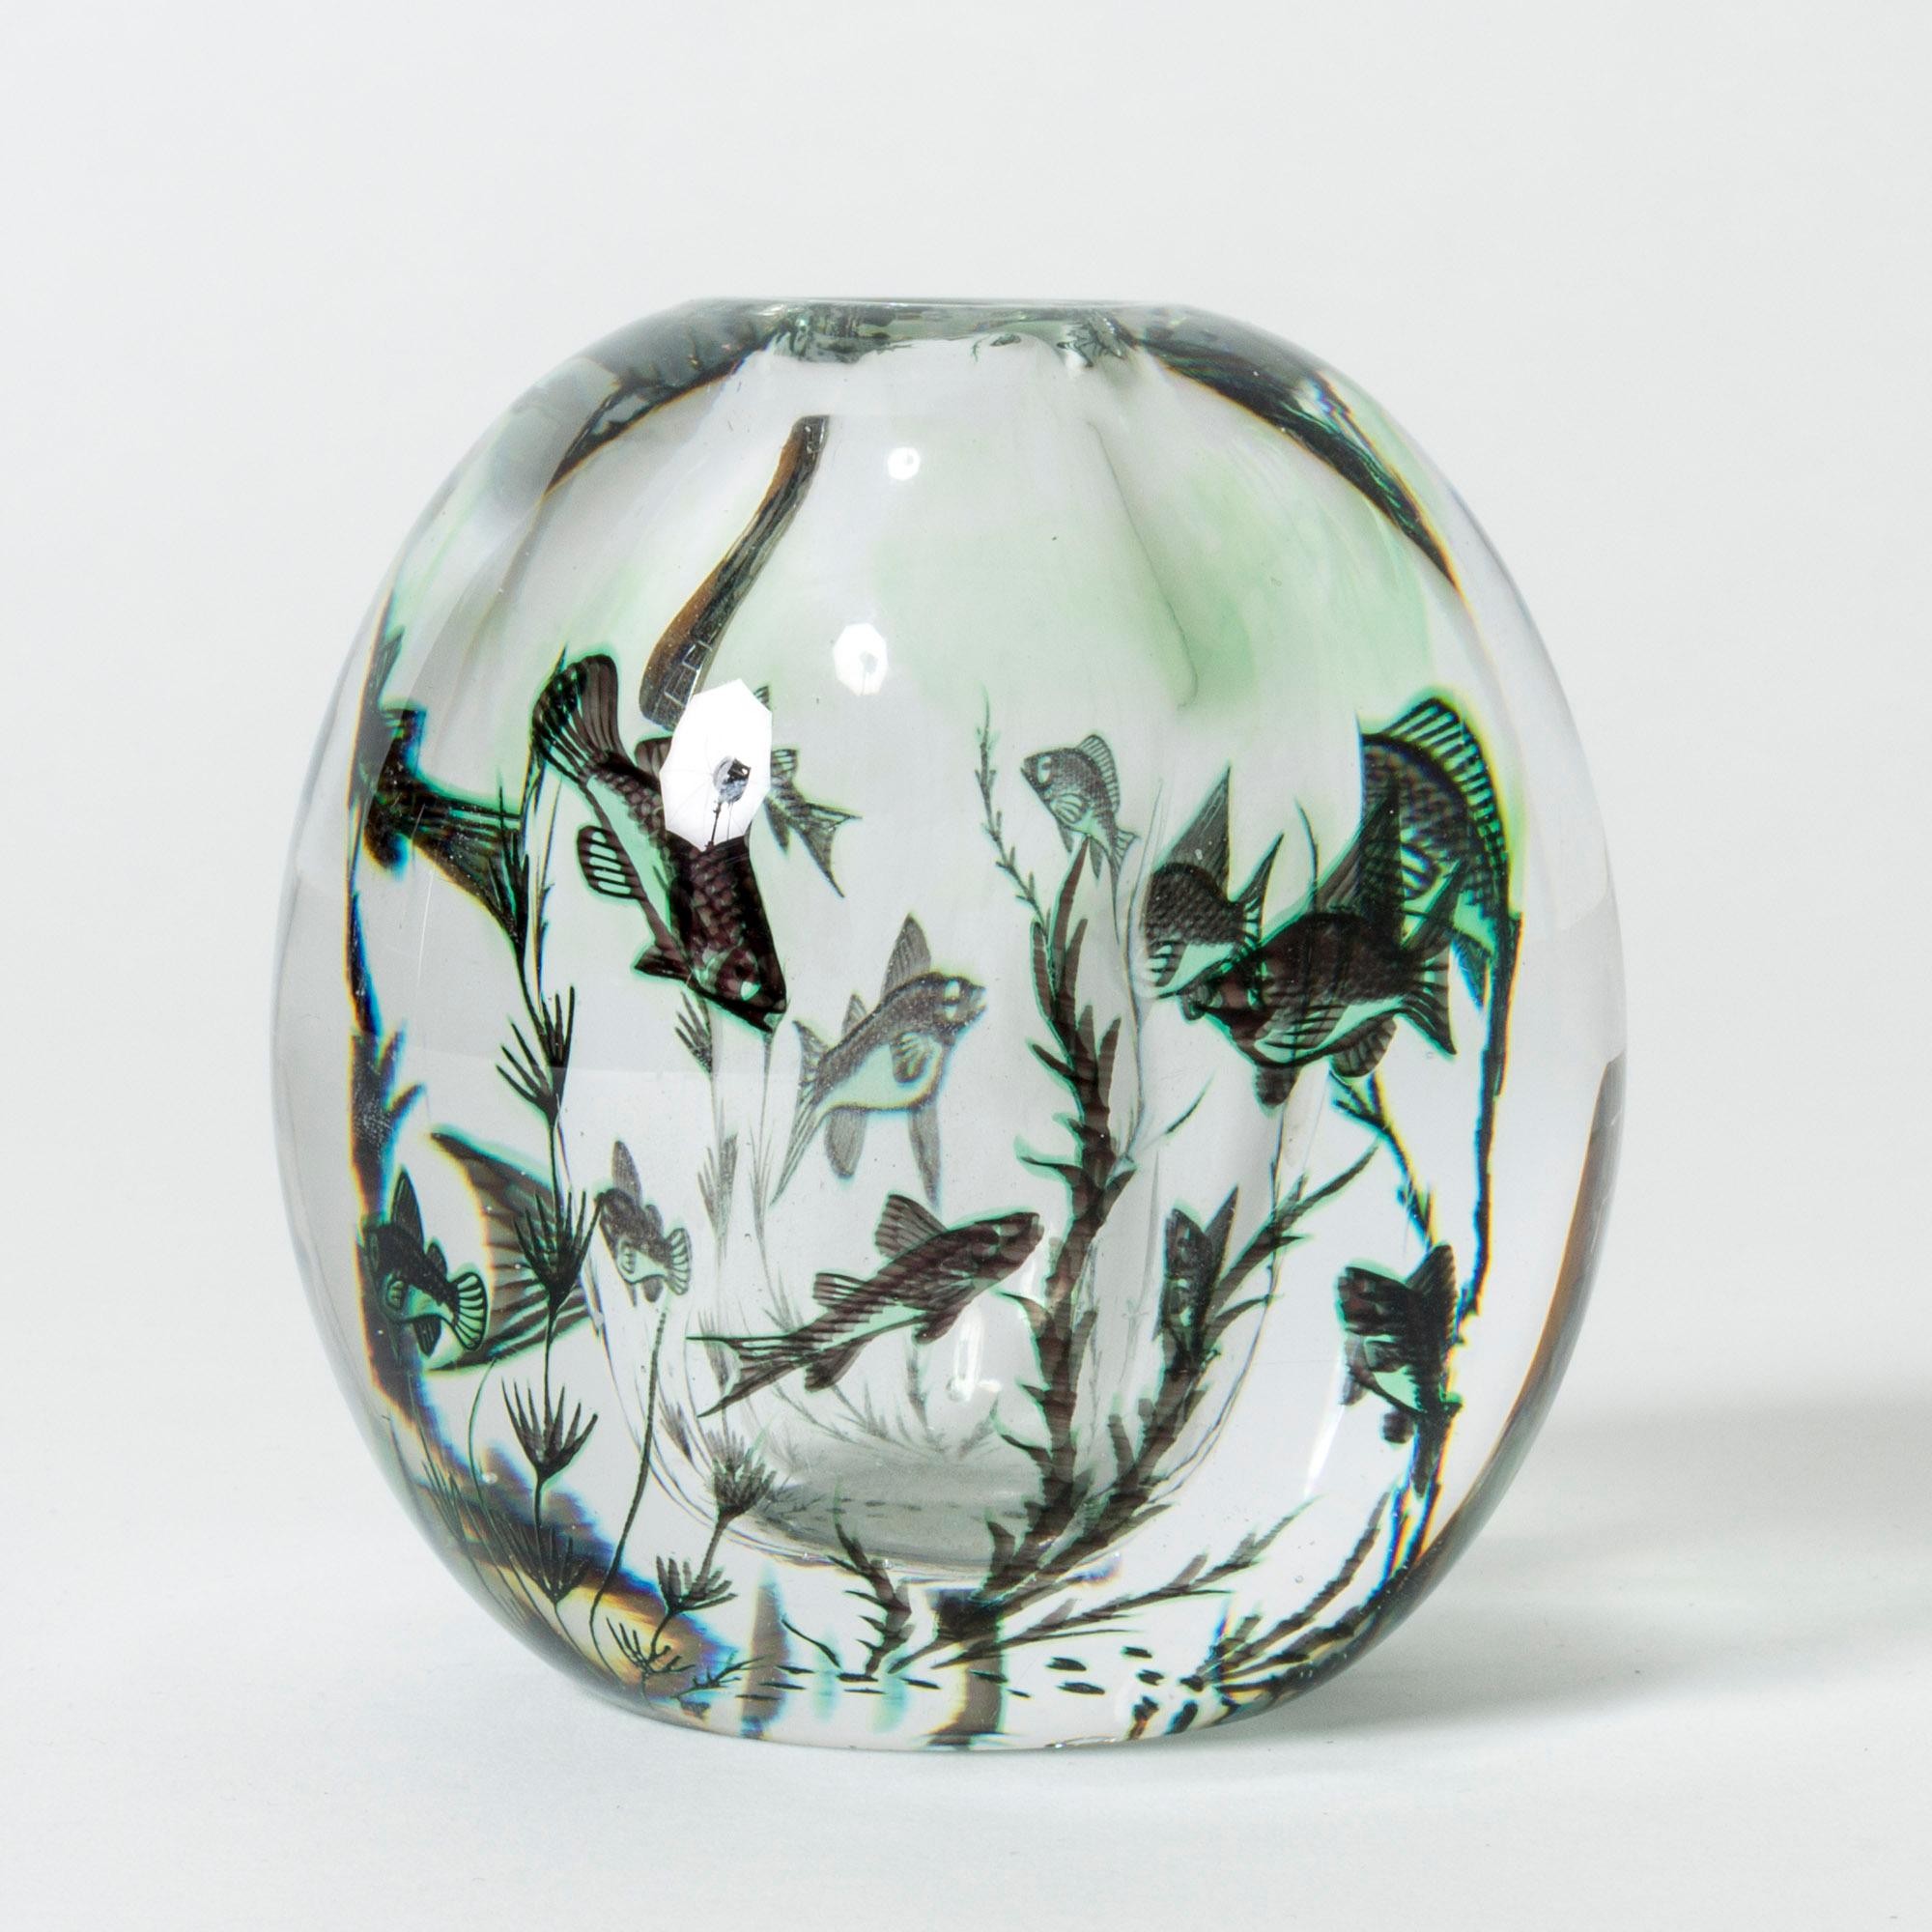 Beautiful graal vase by Edward Hald, crystal clear with nuances of green. Beautiful underwater motif of fish, where the layers of glass create a lively, watery effect.